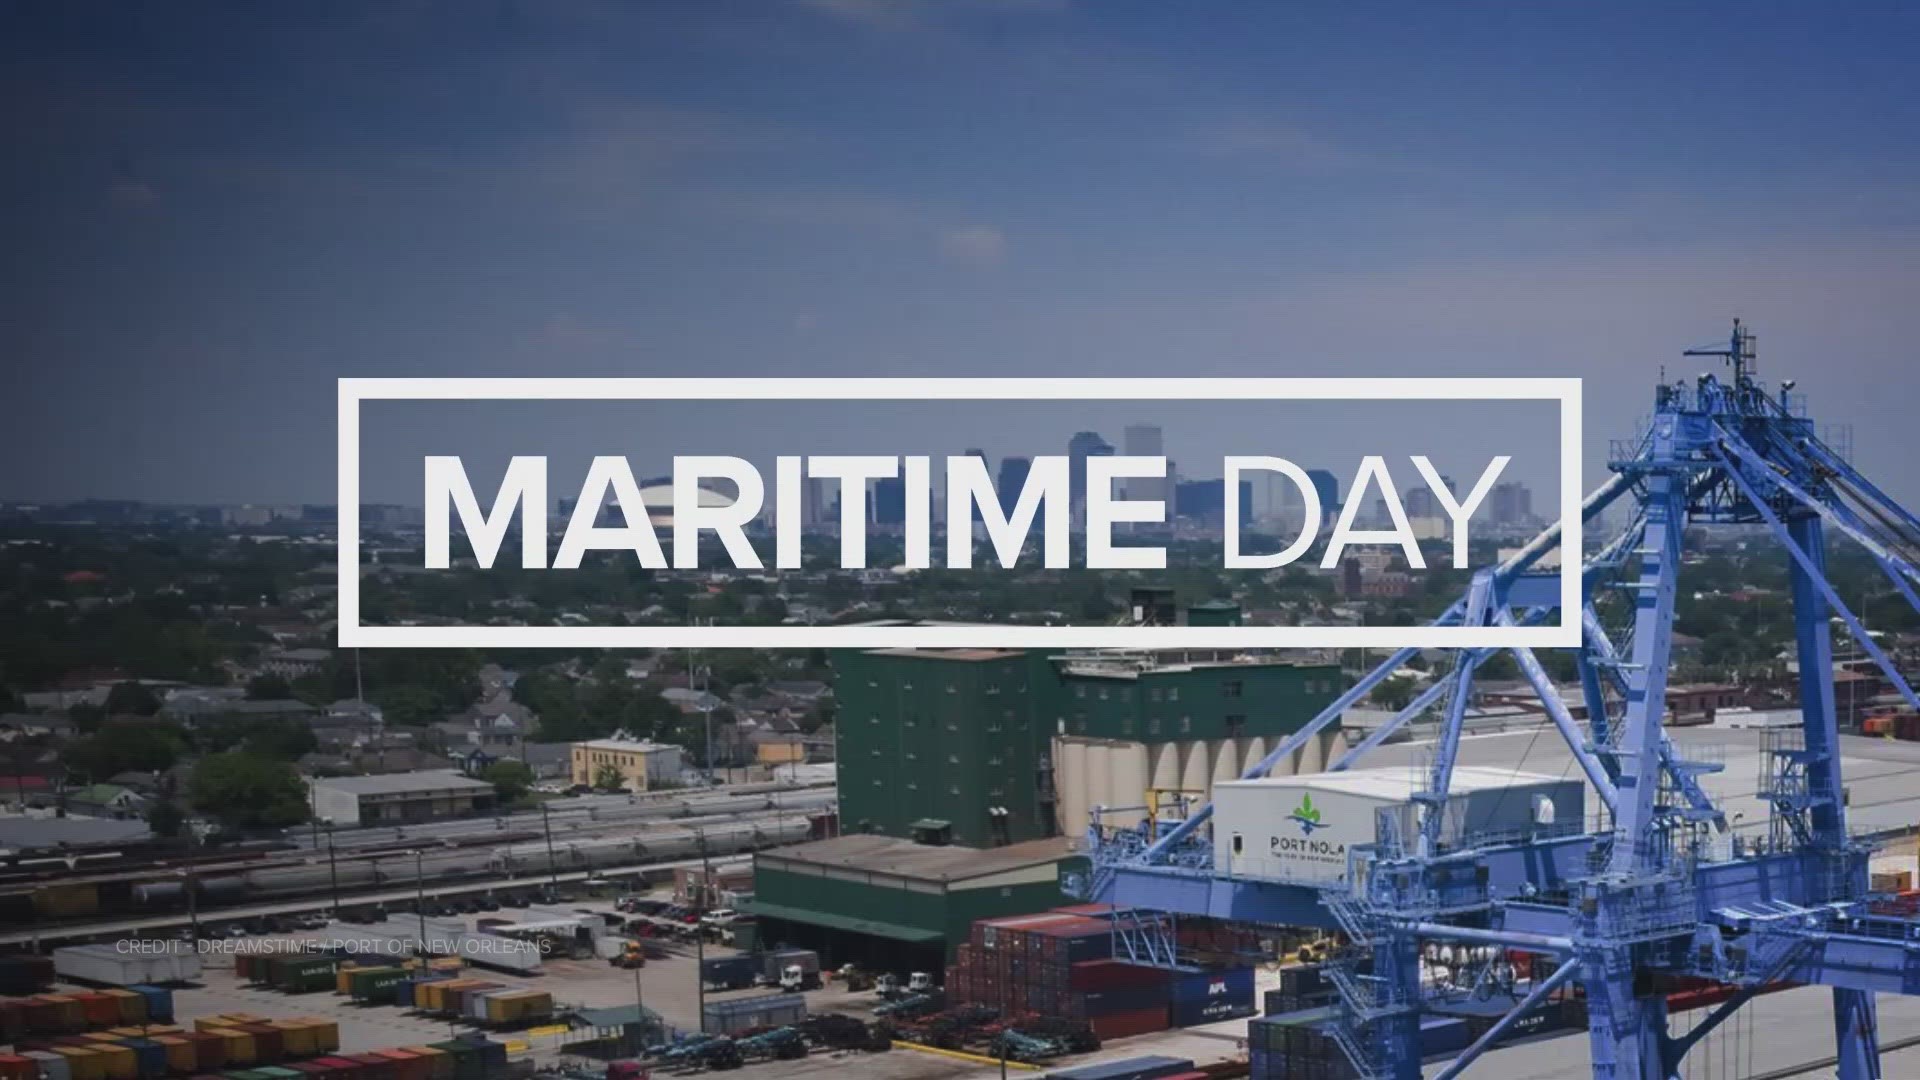 WWL-TV's spotlight on National Maritime Day continues